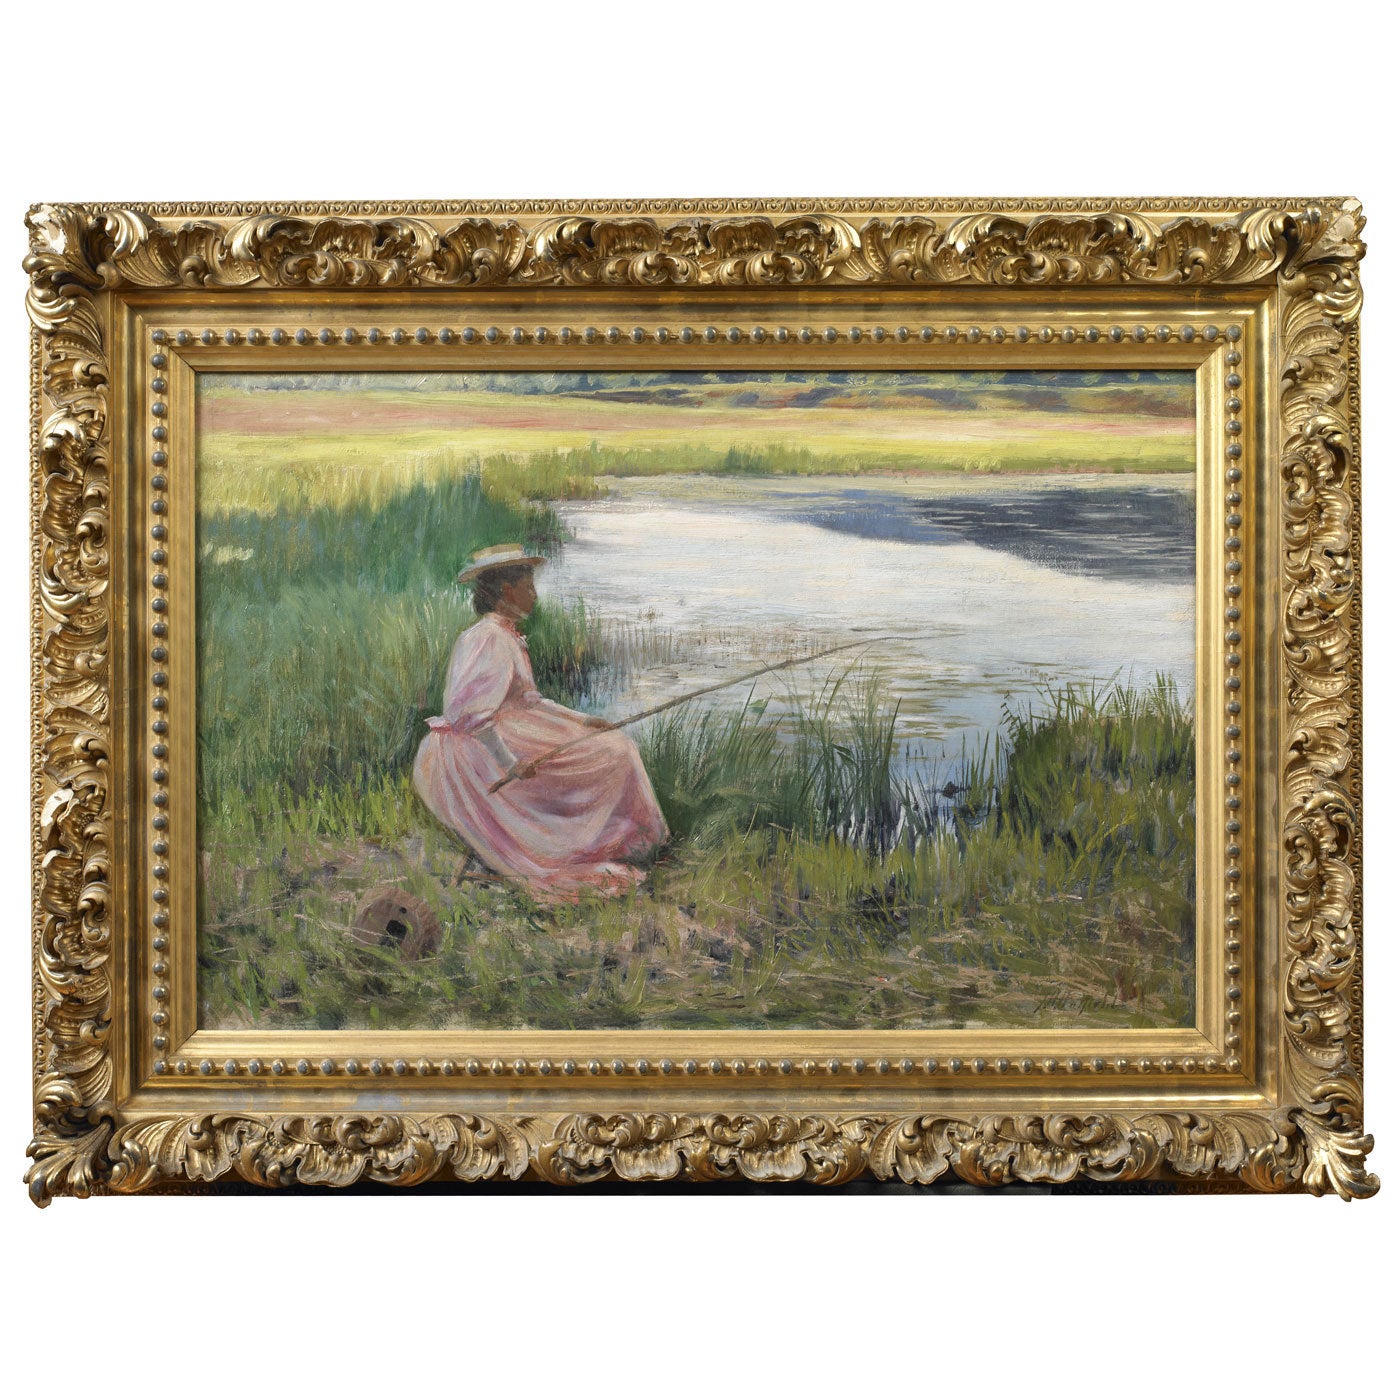 Joseph Henry Hatfield, "Young Woman Fishing Along a River" Oil on Canvas For Sale